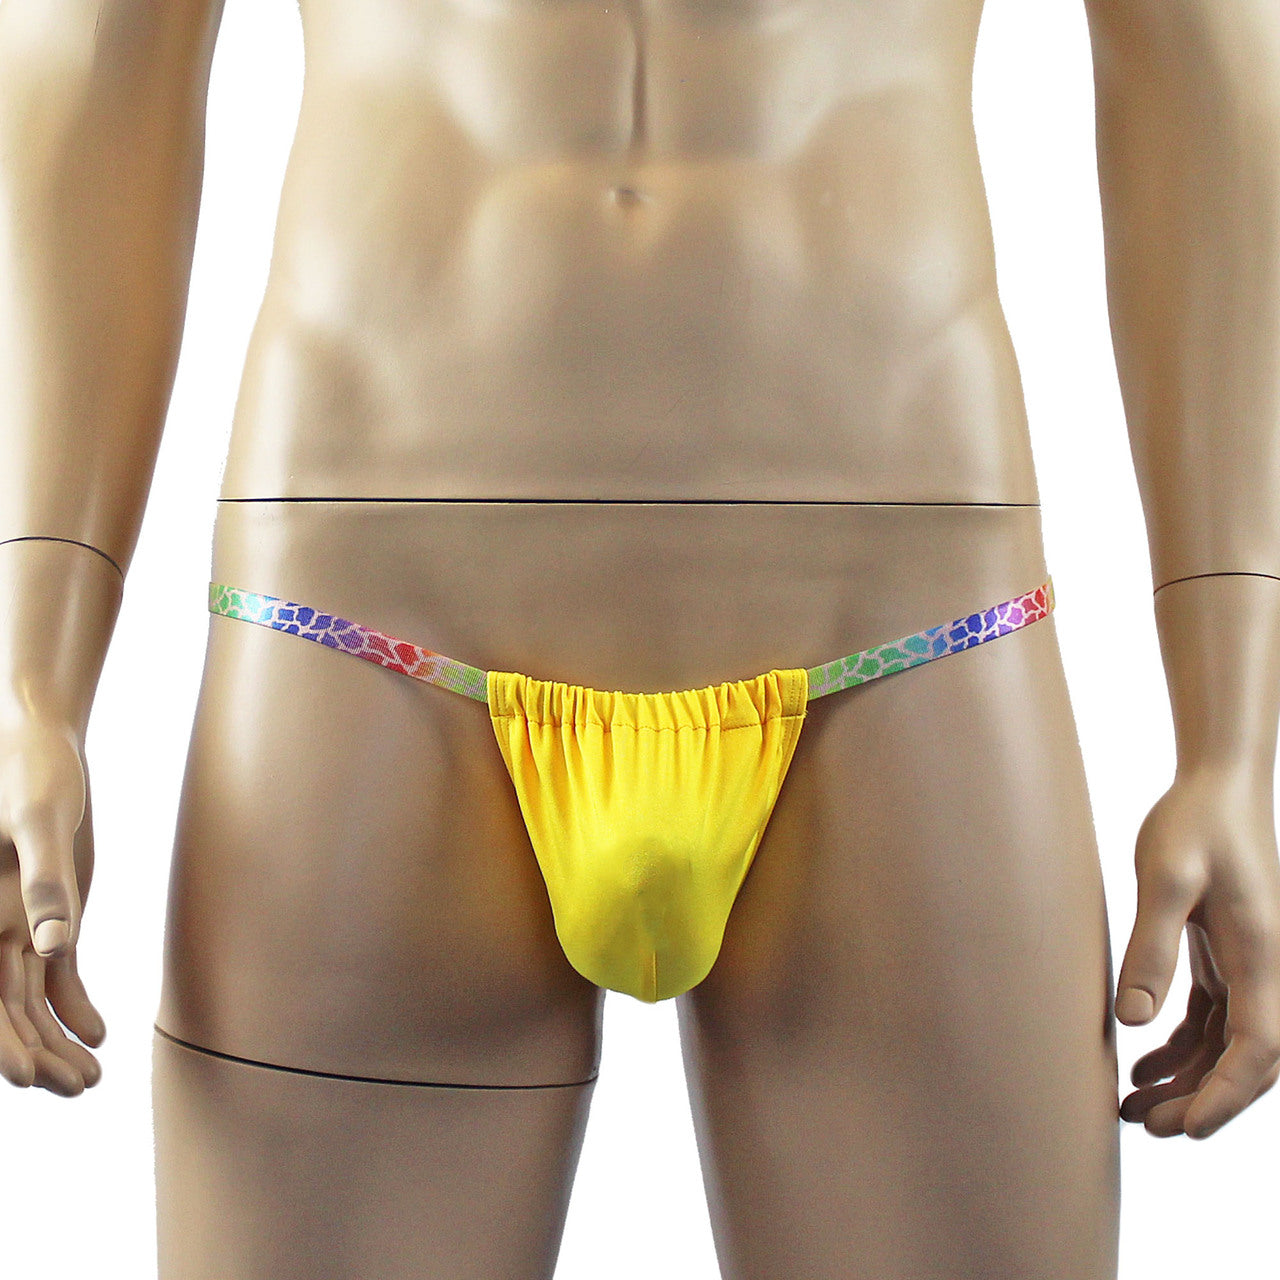 Mens Wild Colourful Adjustable Ball Bag Pouch G string Underwear (yellow plus other colours)